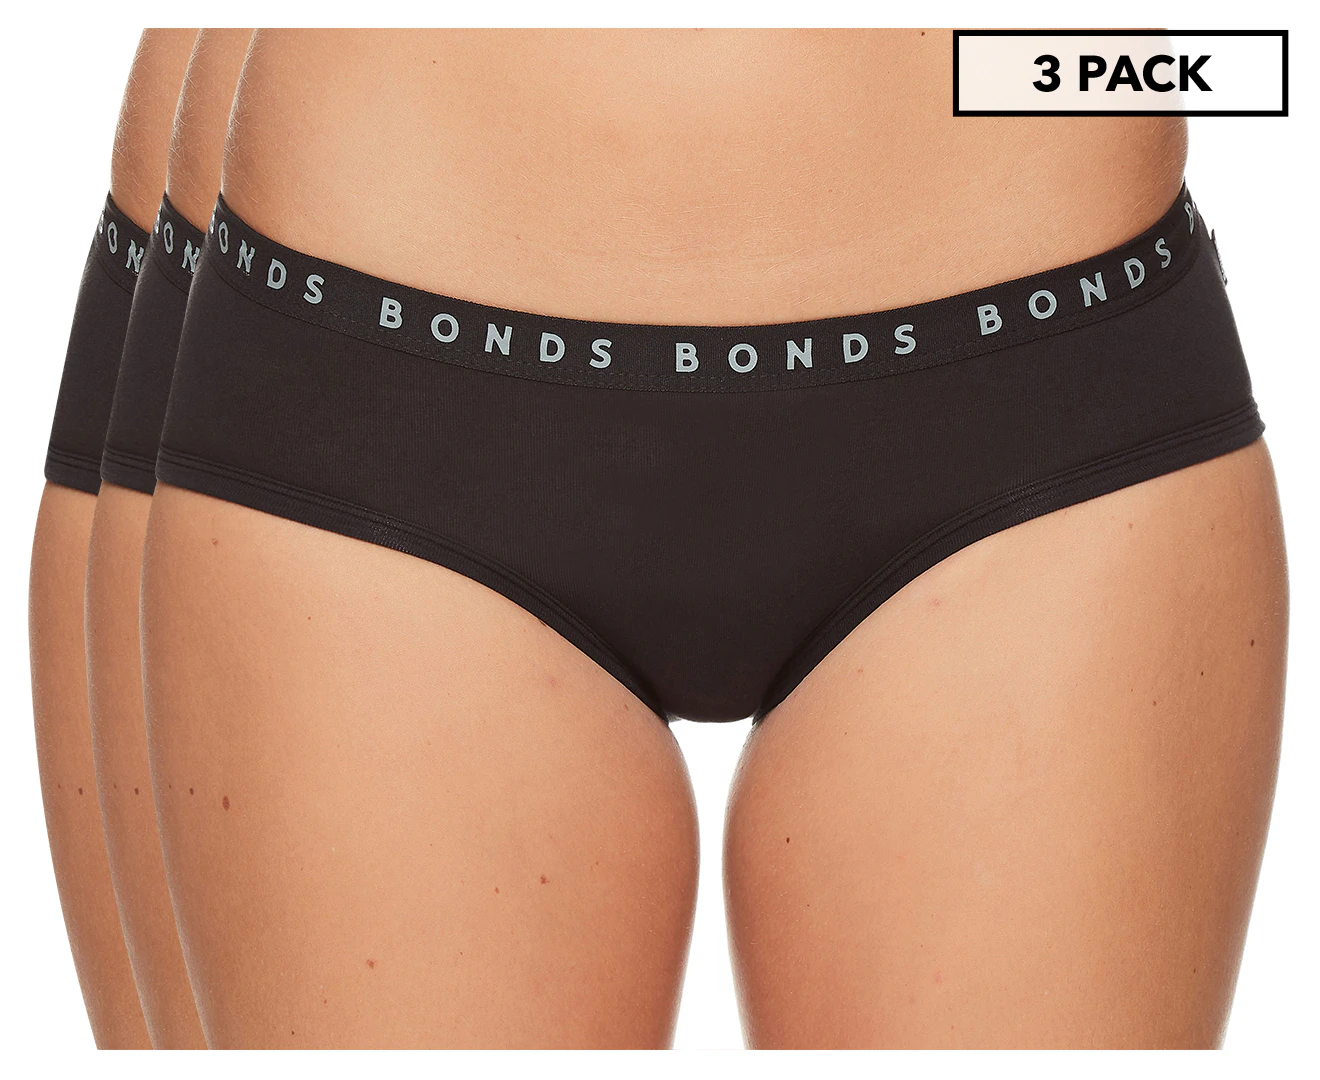 Bonds Women's Everyday Cottontails Full Briefs 3 Pack - Multi